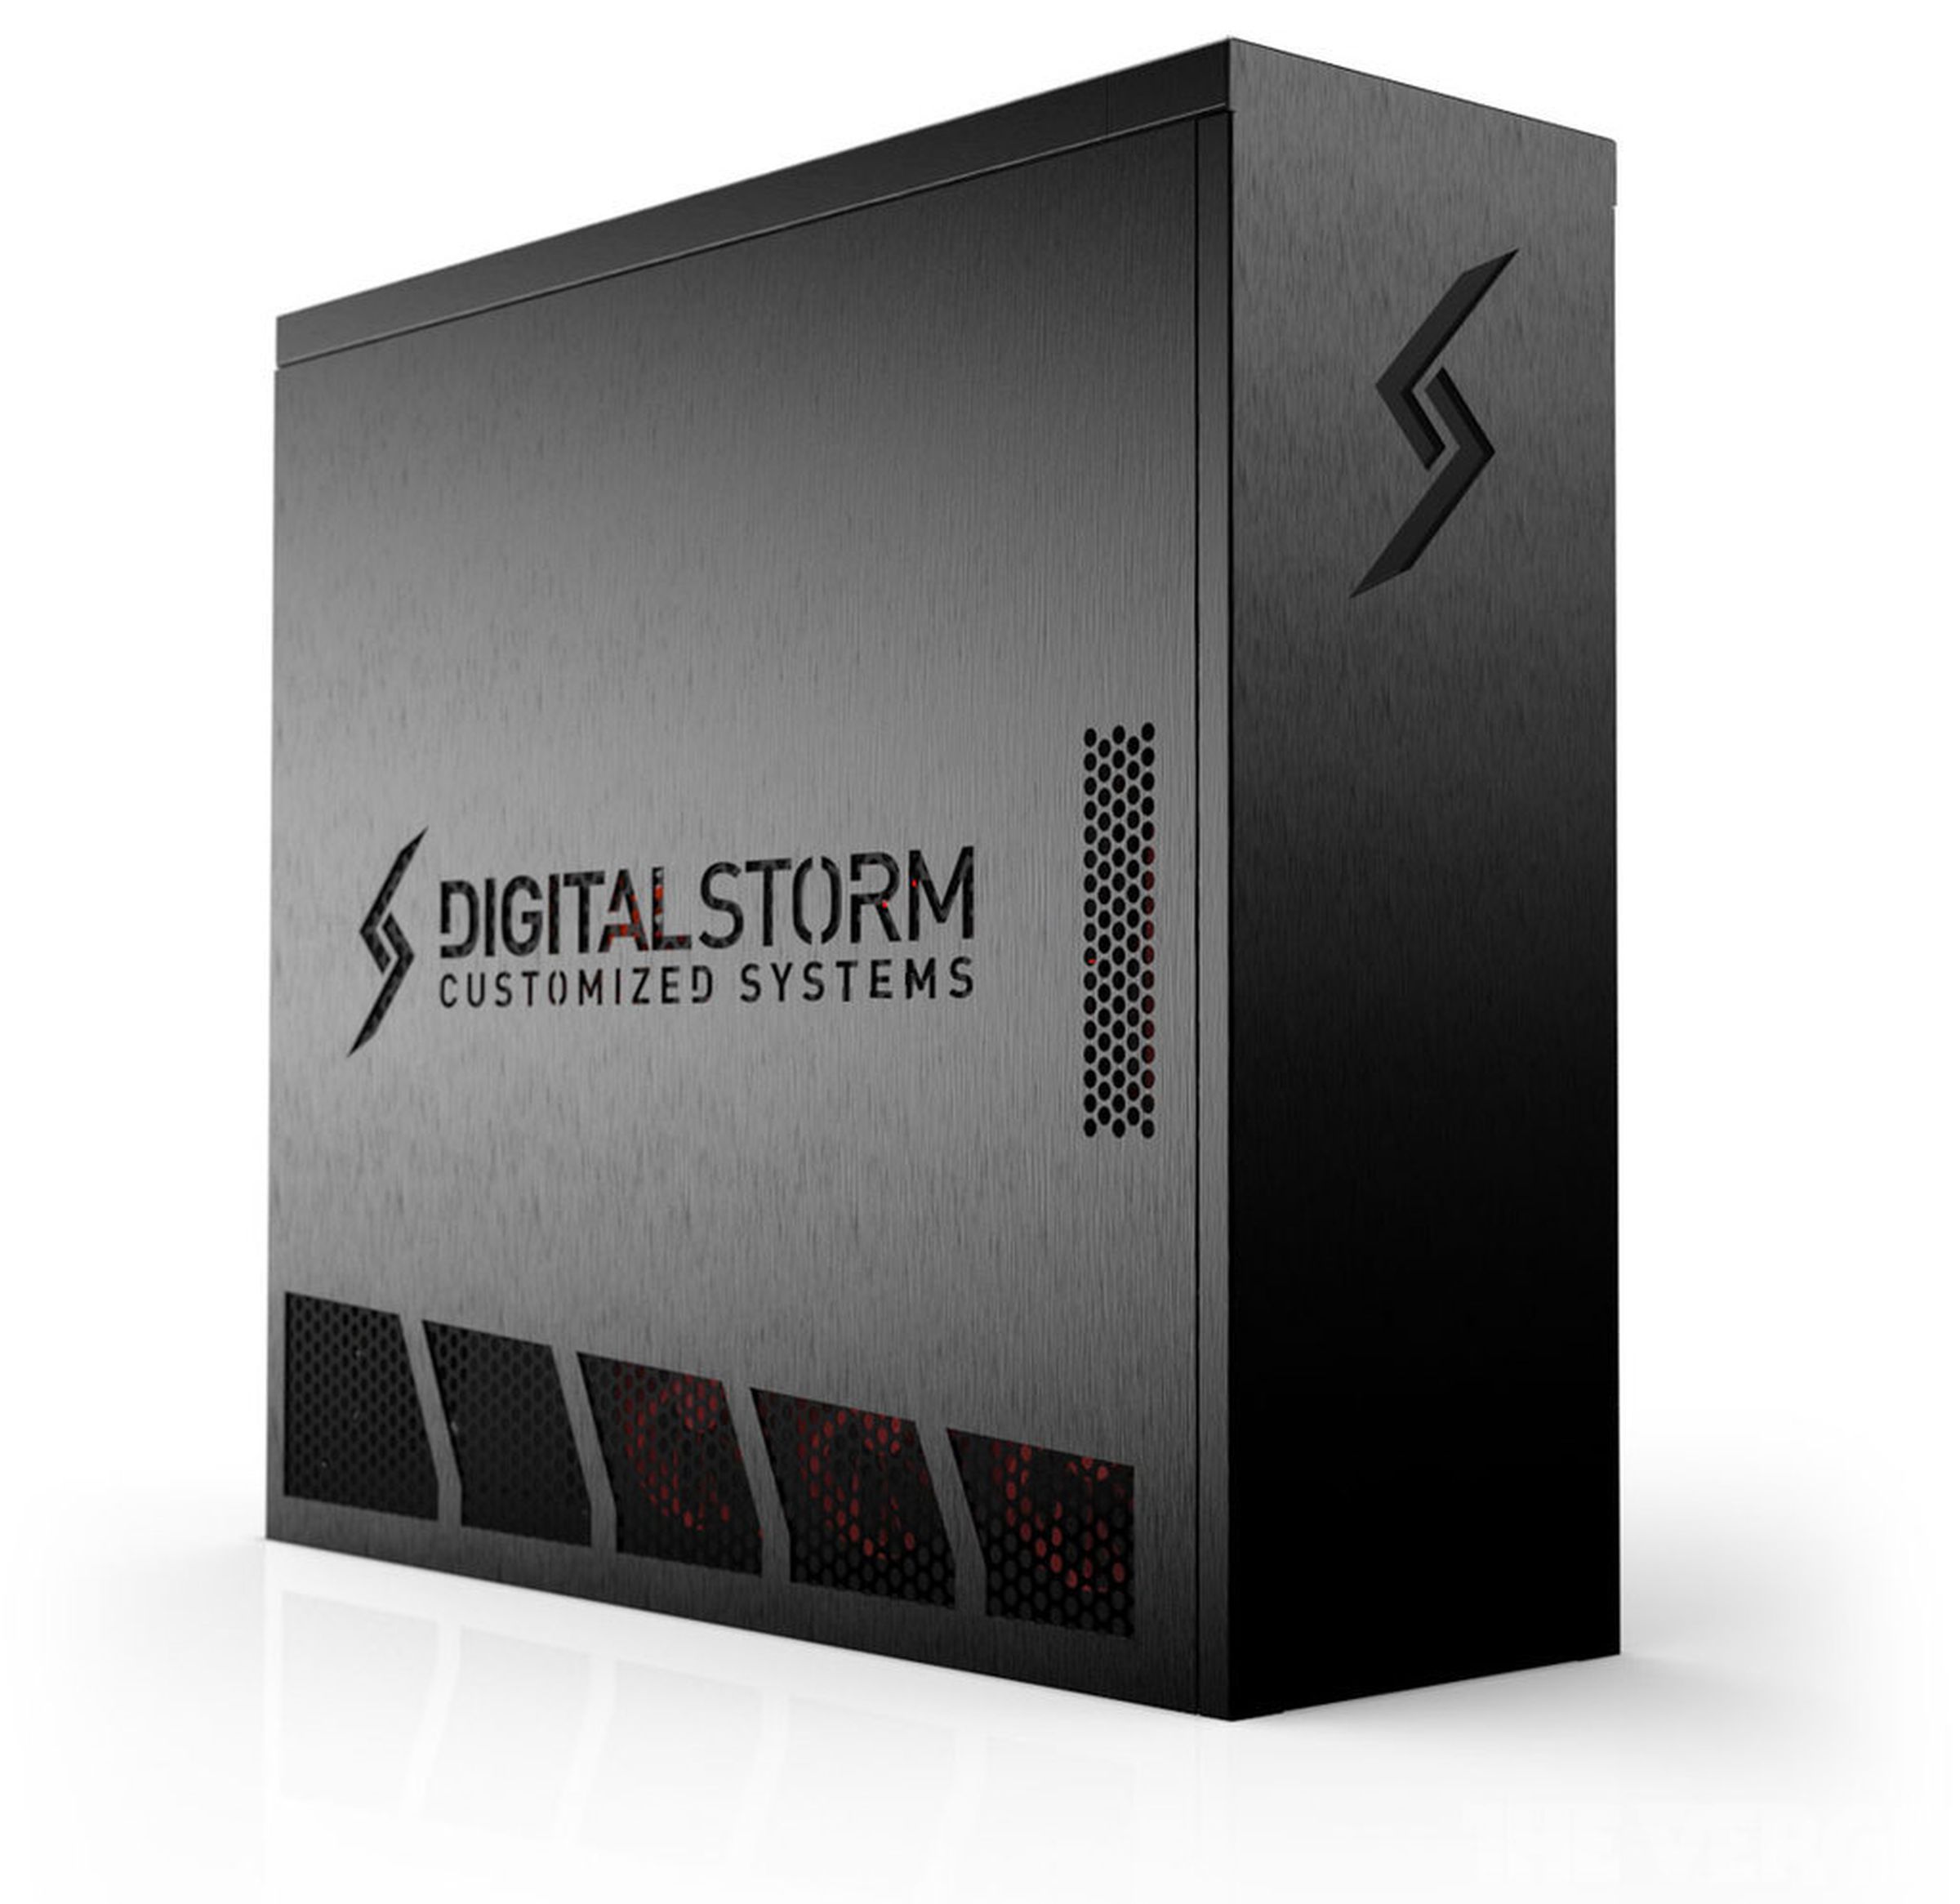 Digital Storm Aventum press pictures and renders